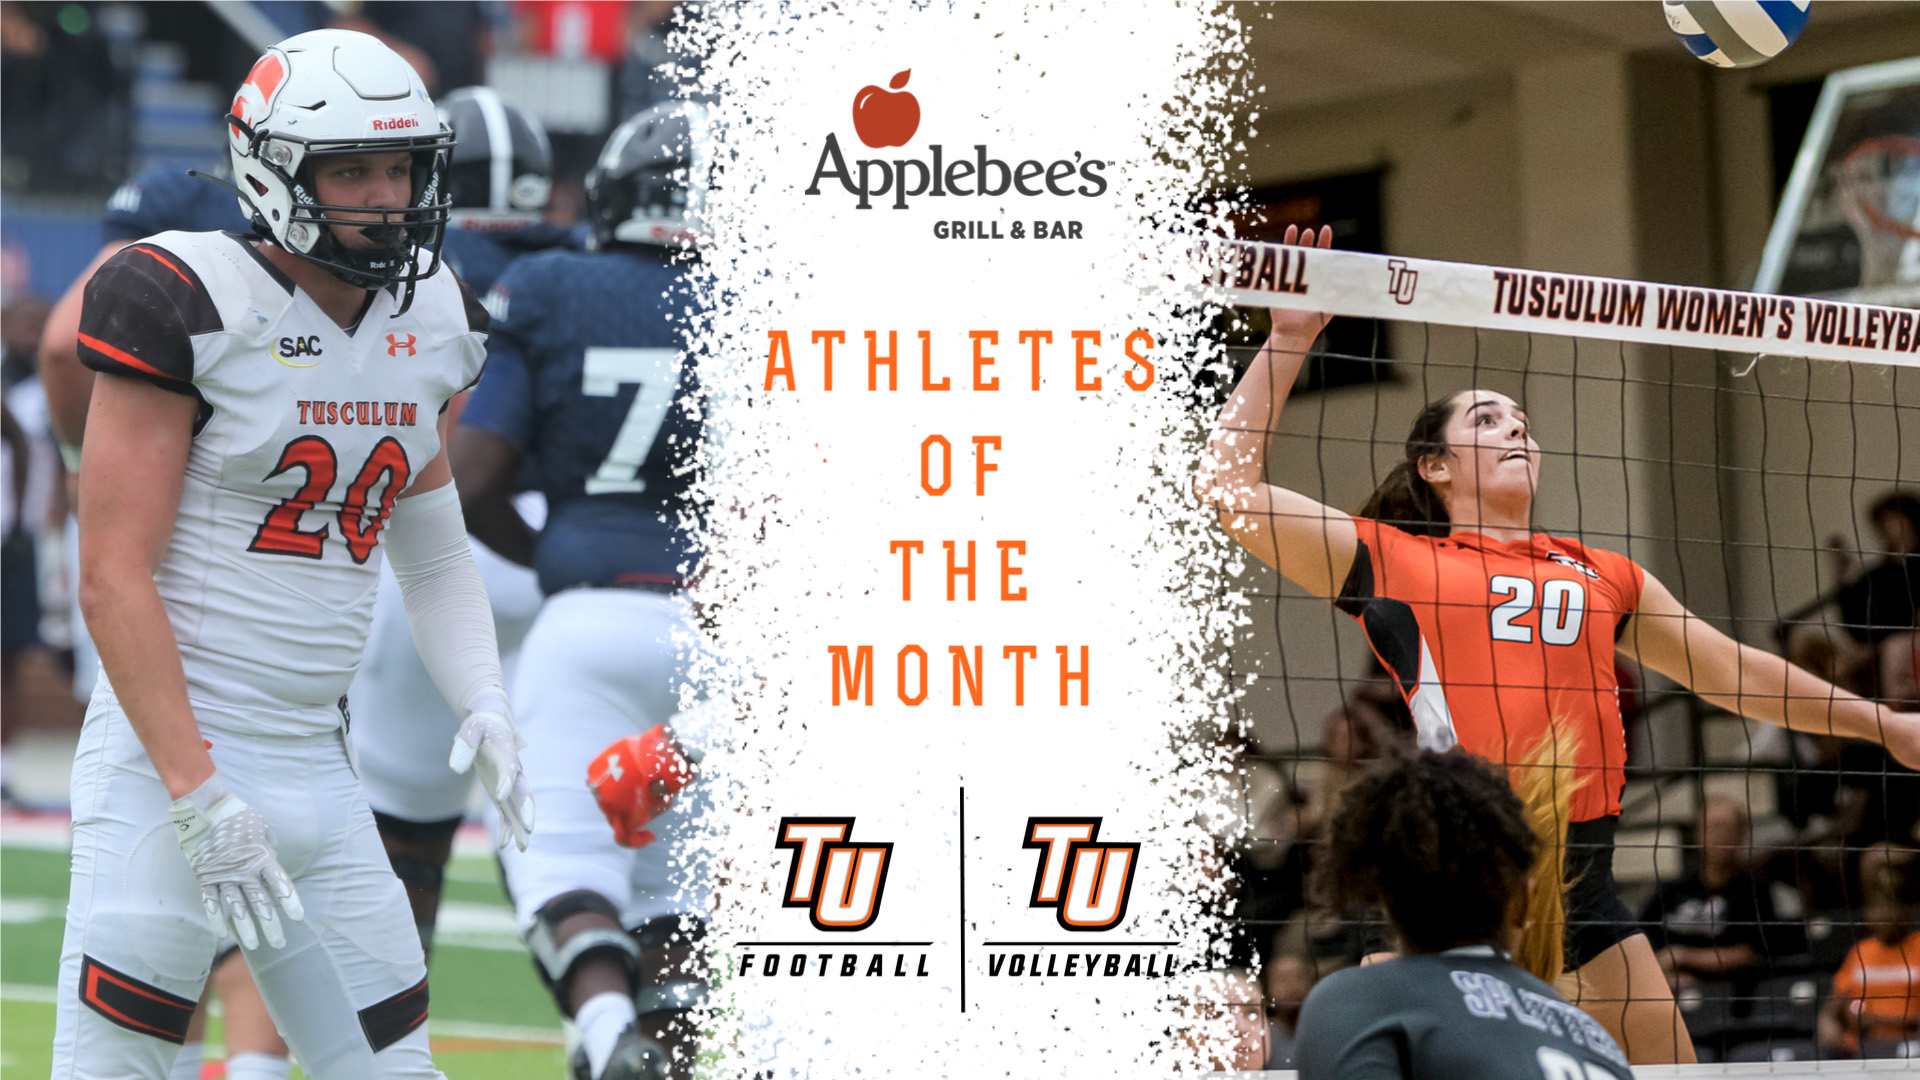 Scott, Foster named Applebee's Student-Athletes of the Week